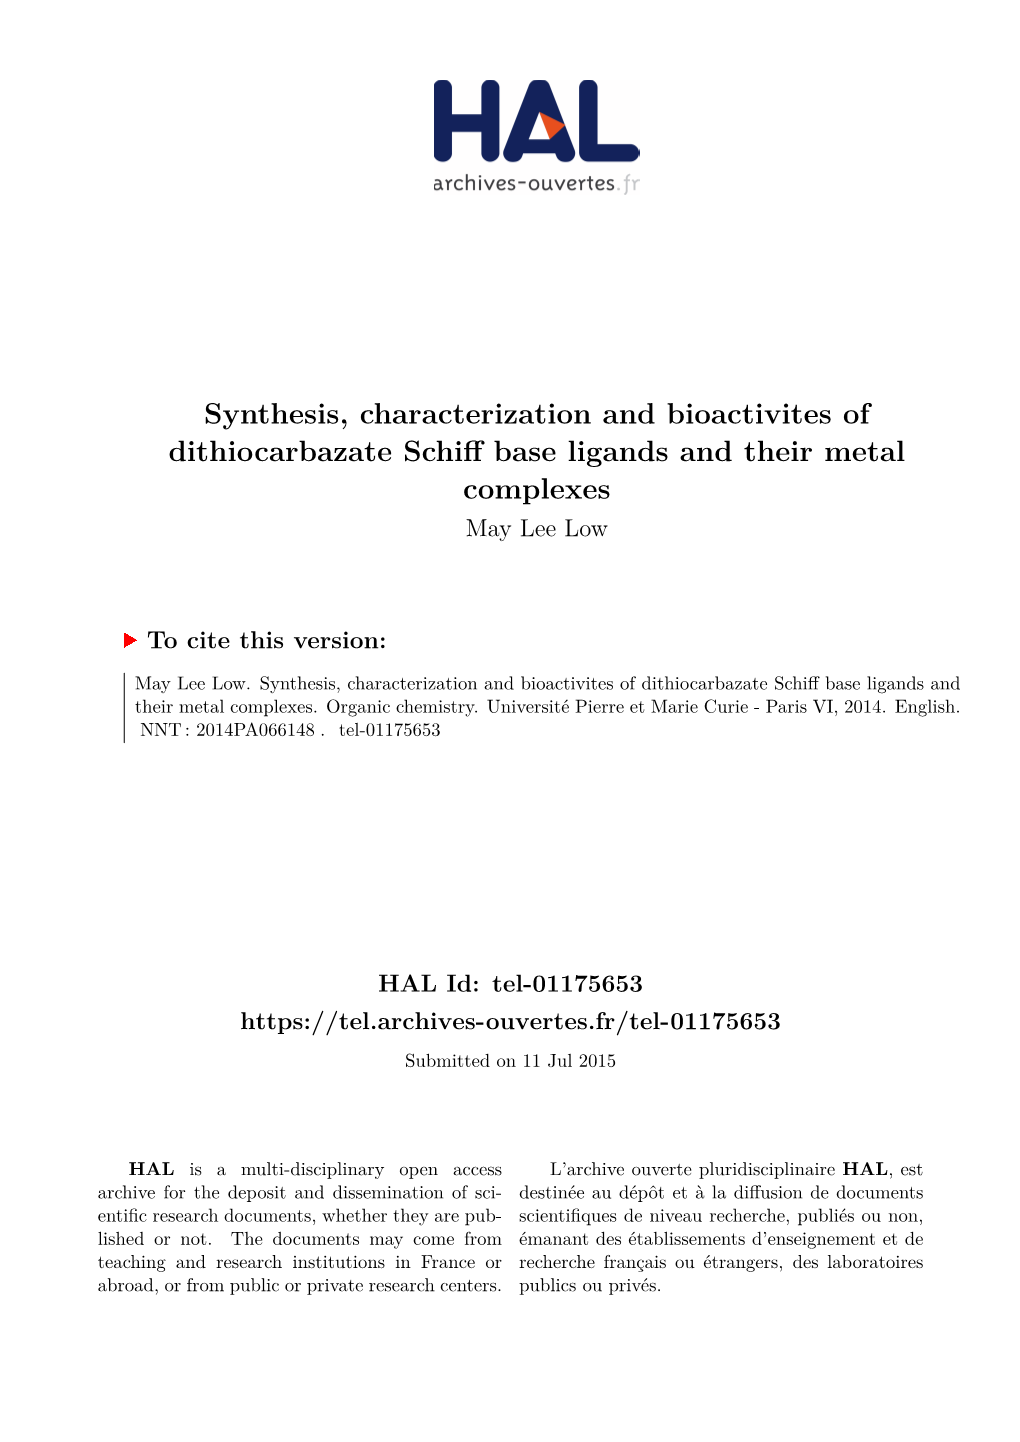 Synthesis, Characterization and Bioactivites of Dithiocarbazate Schiff Base Ligands and Their Metal Complexes May Lee Low